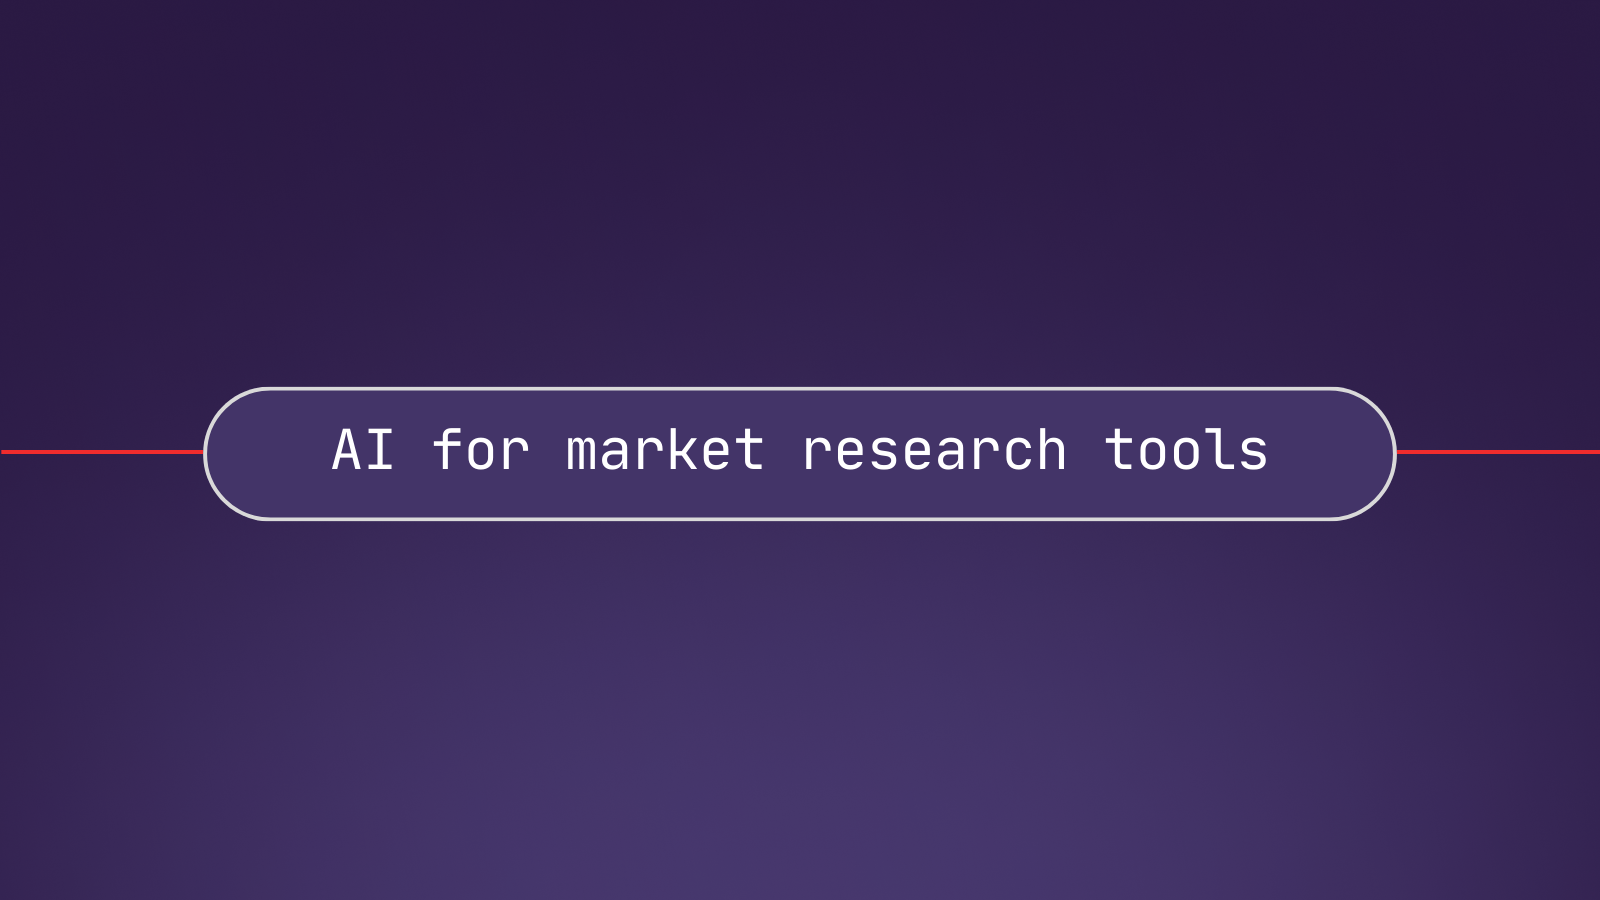 How to use AI to build powerful market research tools